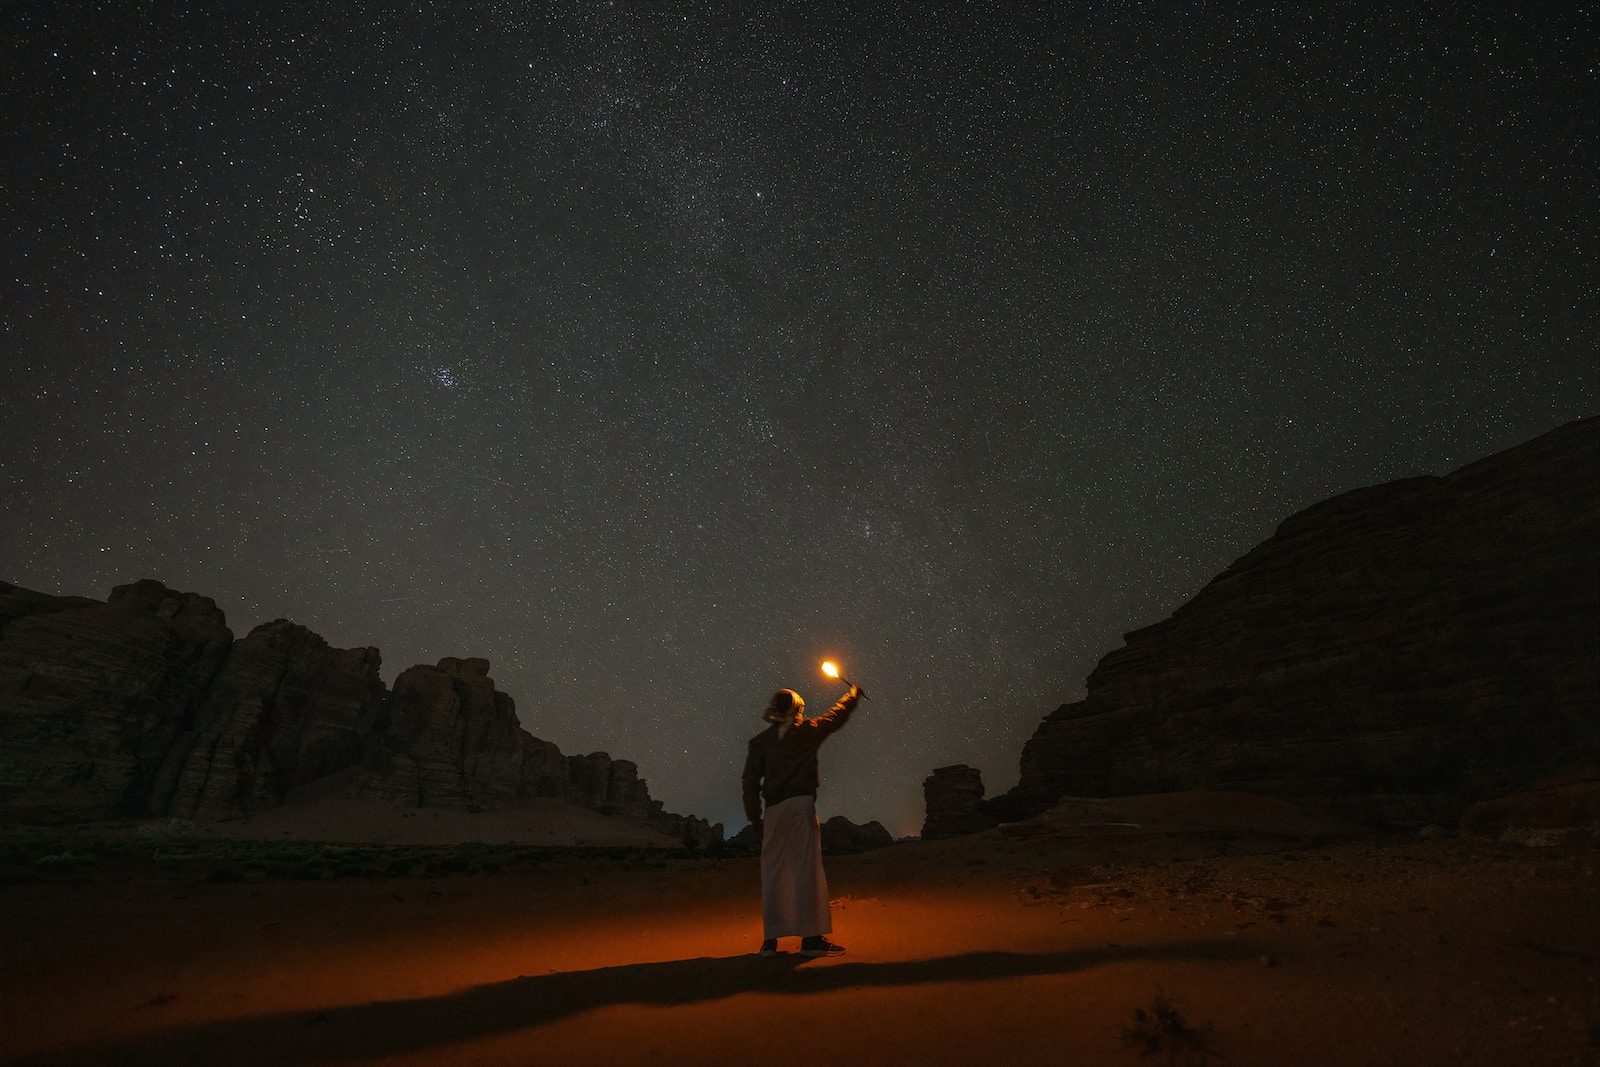 a person standing in the desert holding a lantern